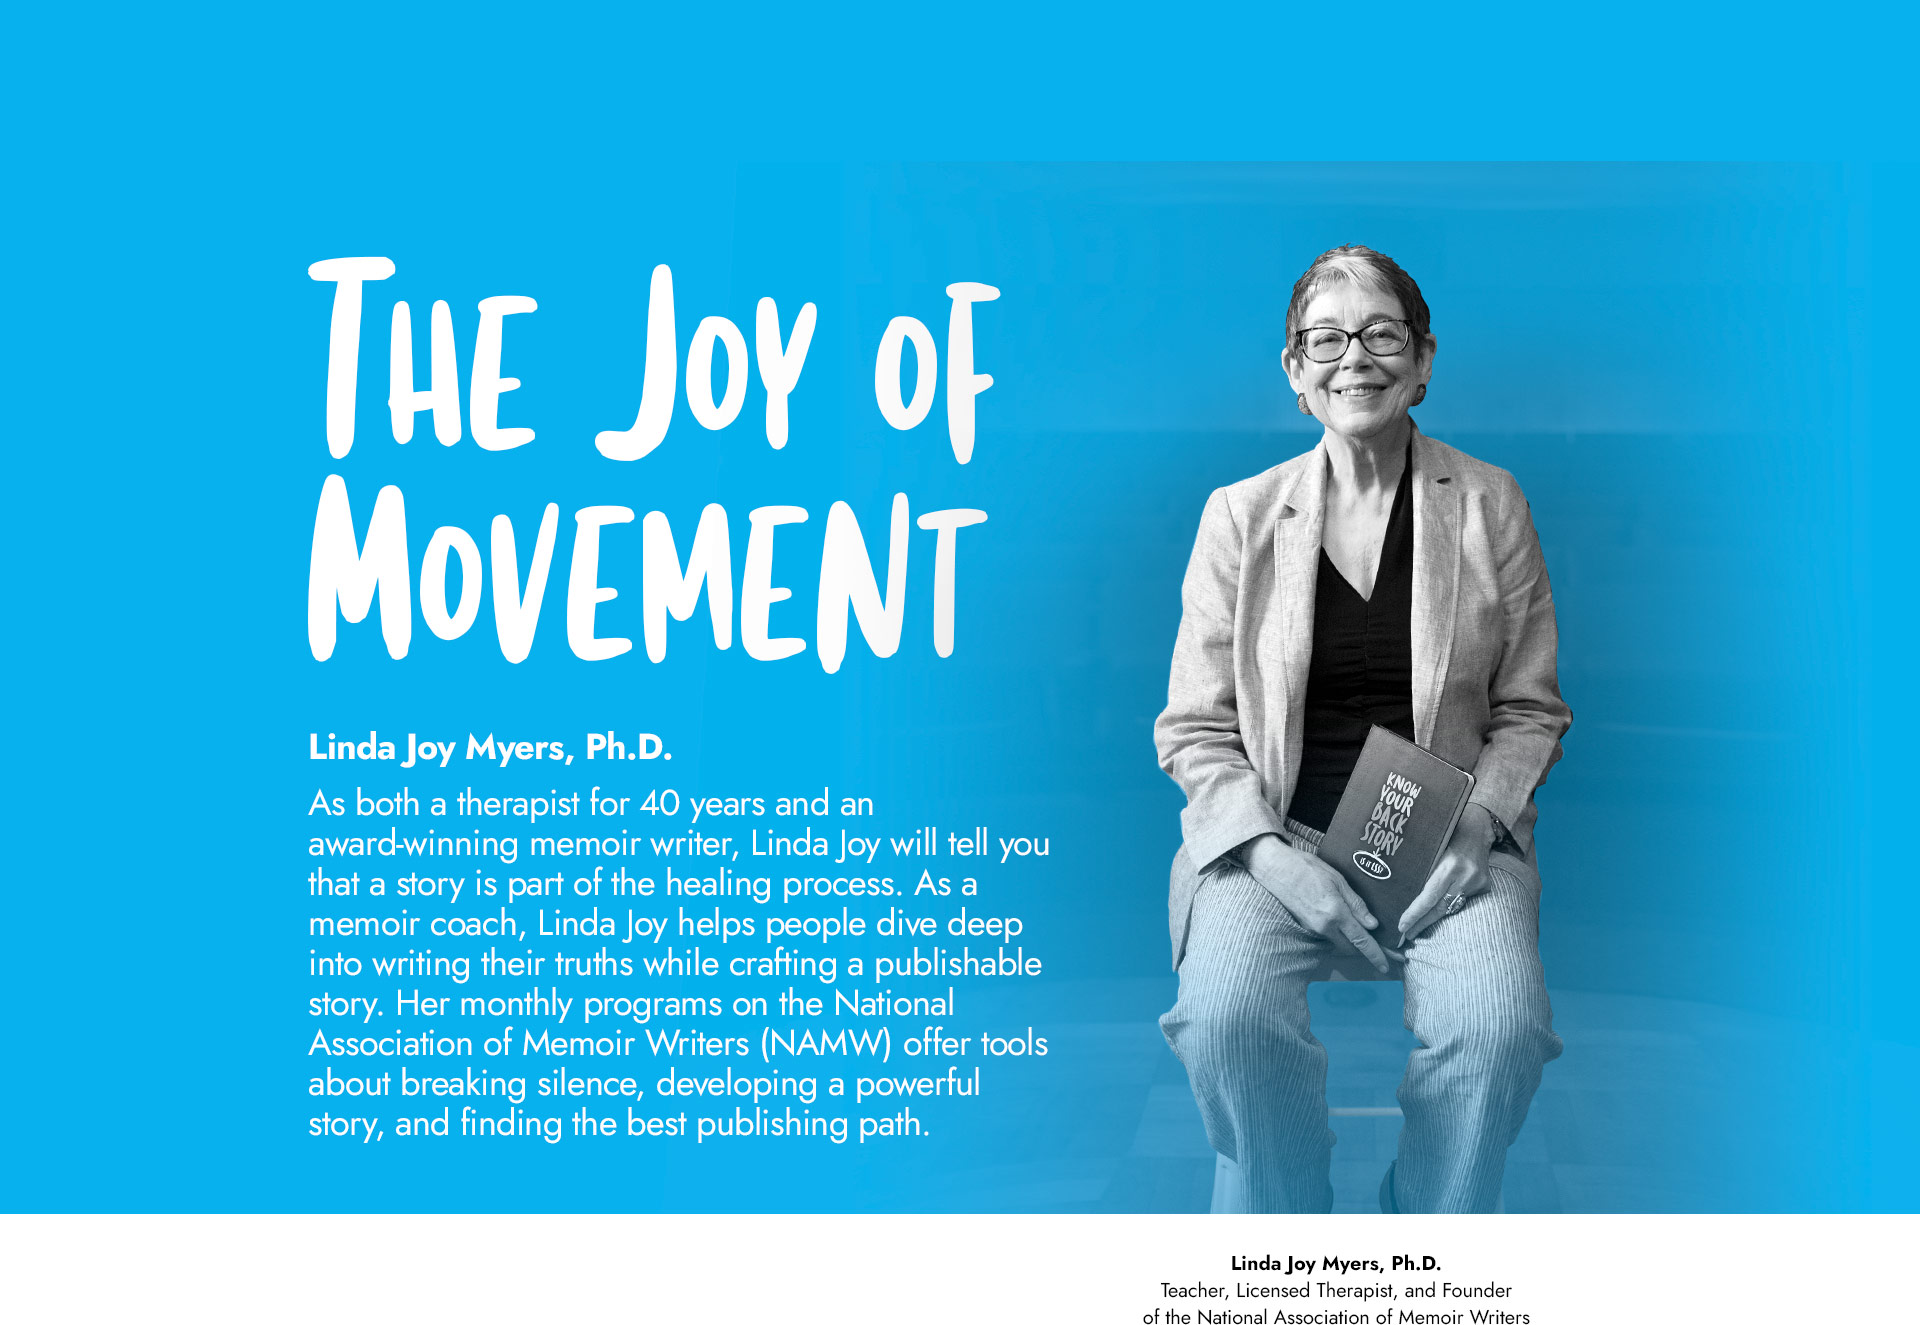 Image of Dr. Myers sitting on a chair, smiling, holding a Know Your Back Story notebook. Text: The Joy of Movement. Linda Joy Myers, Ph.D. As both a therapist for 40 years and an award-winning memoir writer, Linda Joy will tell you that a story is part of the healing process. As a memoir coach, Linda Joy helps people dive deep into writing their truths while crafting a publishable story. Her monthly programs on the National Association of Memoir Writers (NAMW) offer tools about breaking silence, developing a powerful story, and finding the best publishing path.